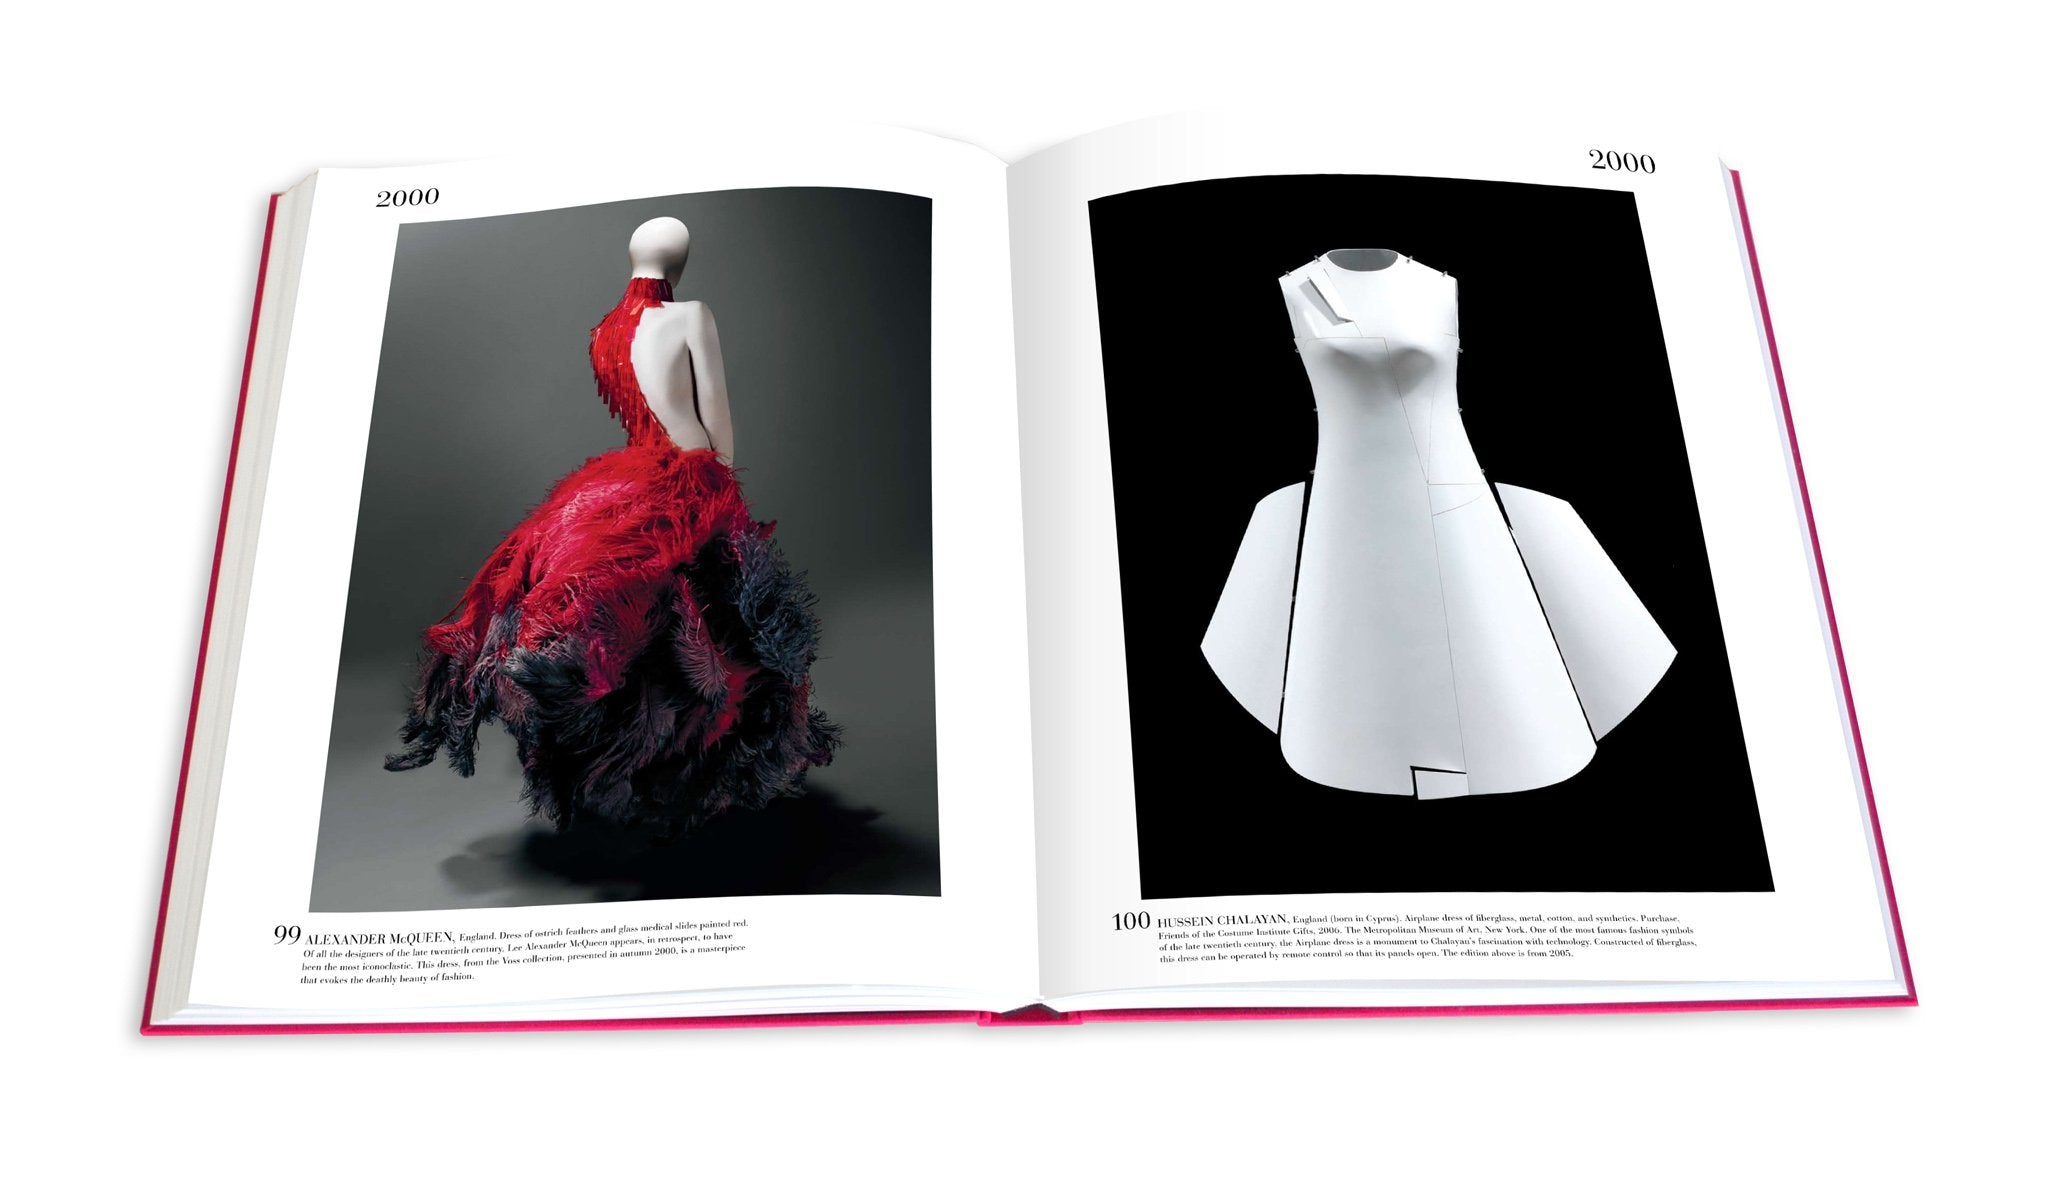 ASSOULINE The Impossible Collection of Fashion by Valerie Steele